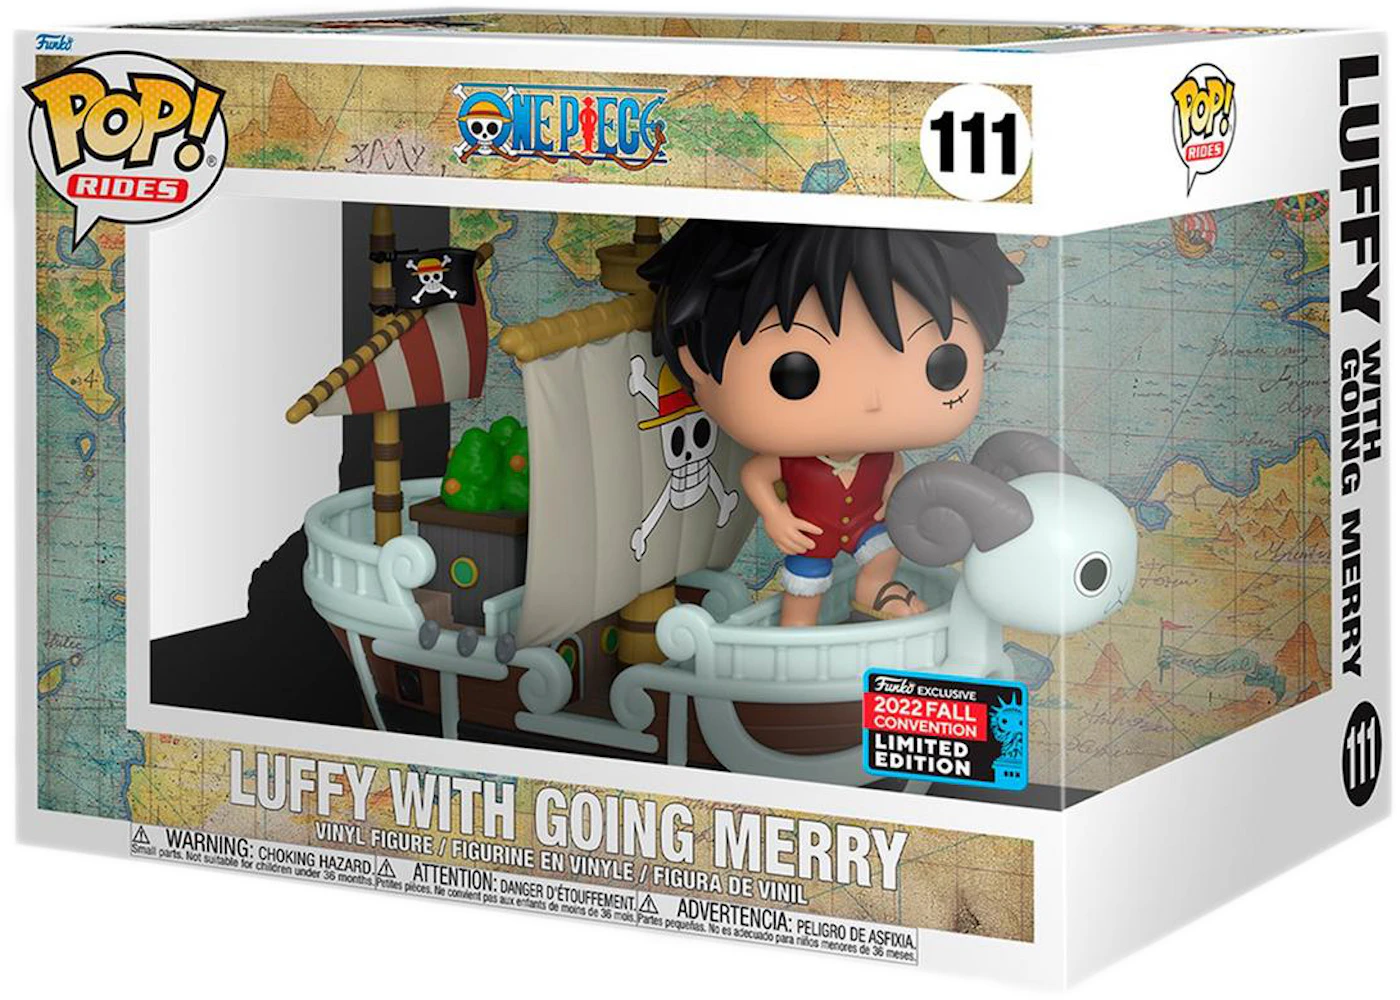 Funko Pop! Rides One Piece Luffy with Going Merry 2022 Fall Convention